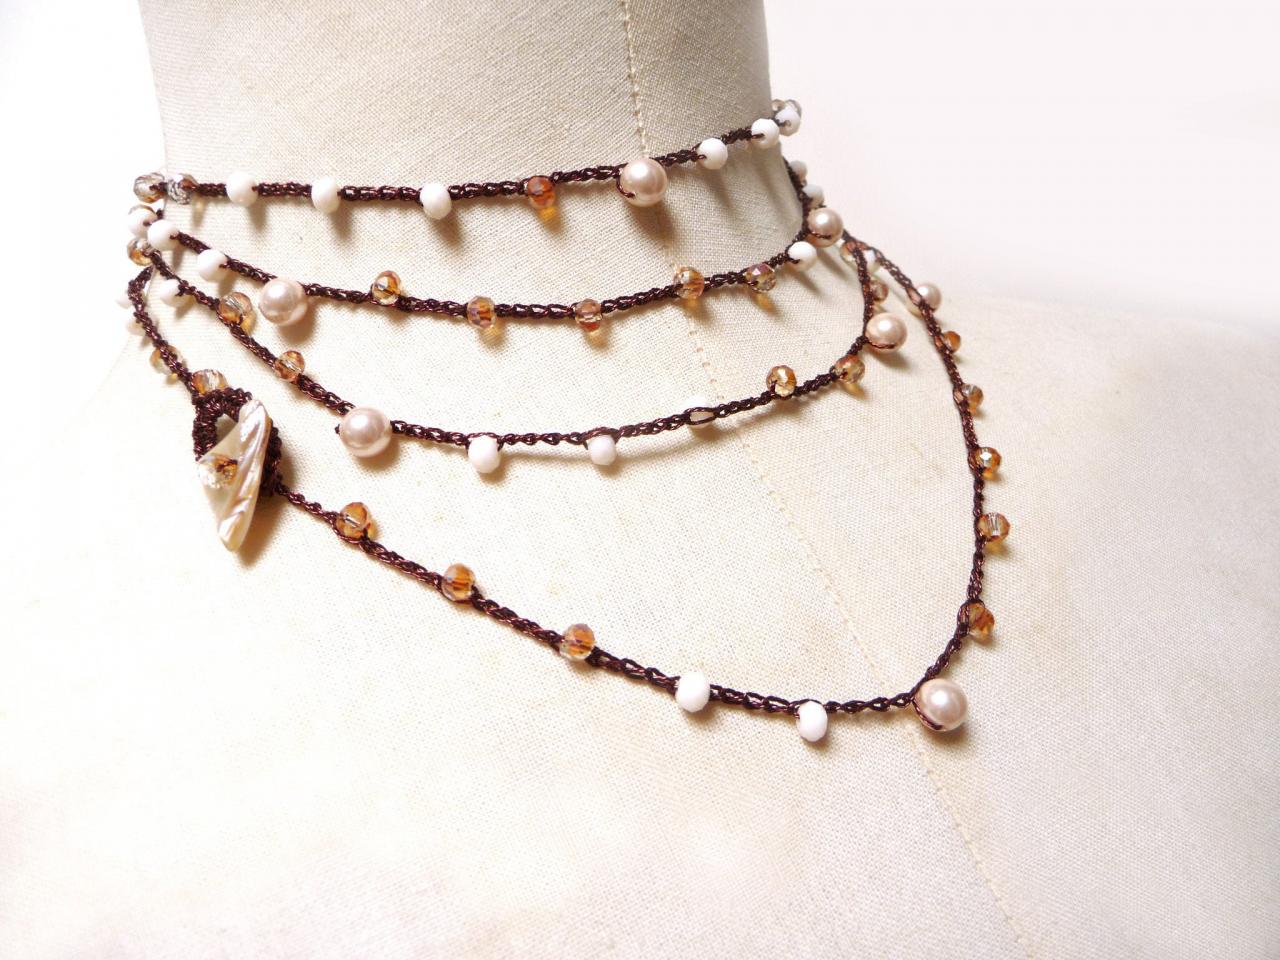 Long Beaded Necklace / Multi Wrap Bracelet, Rosary Crochet Necklace With Peach Pink And Cream White Crystals And Pearls, Copper Brown Thread